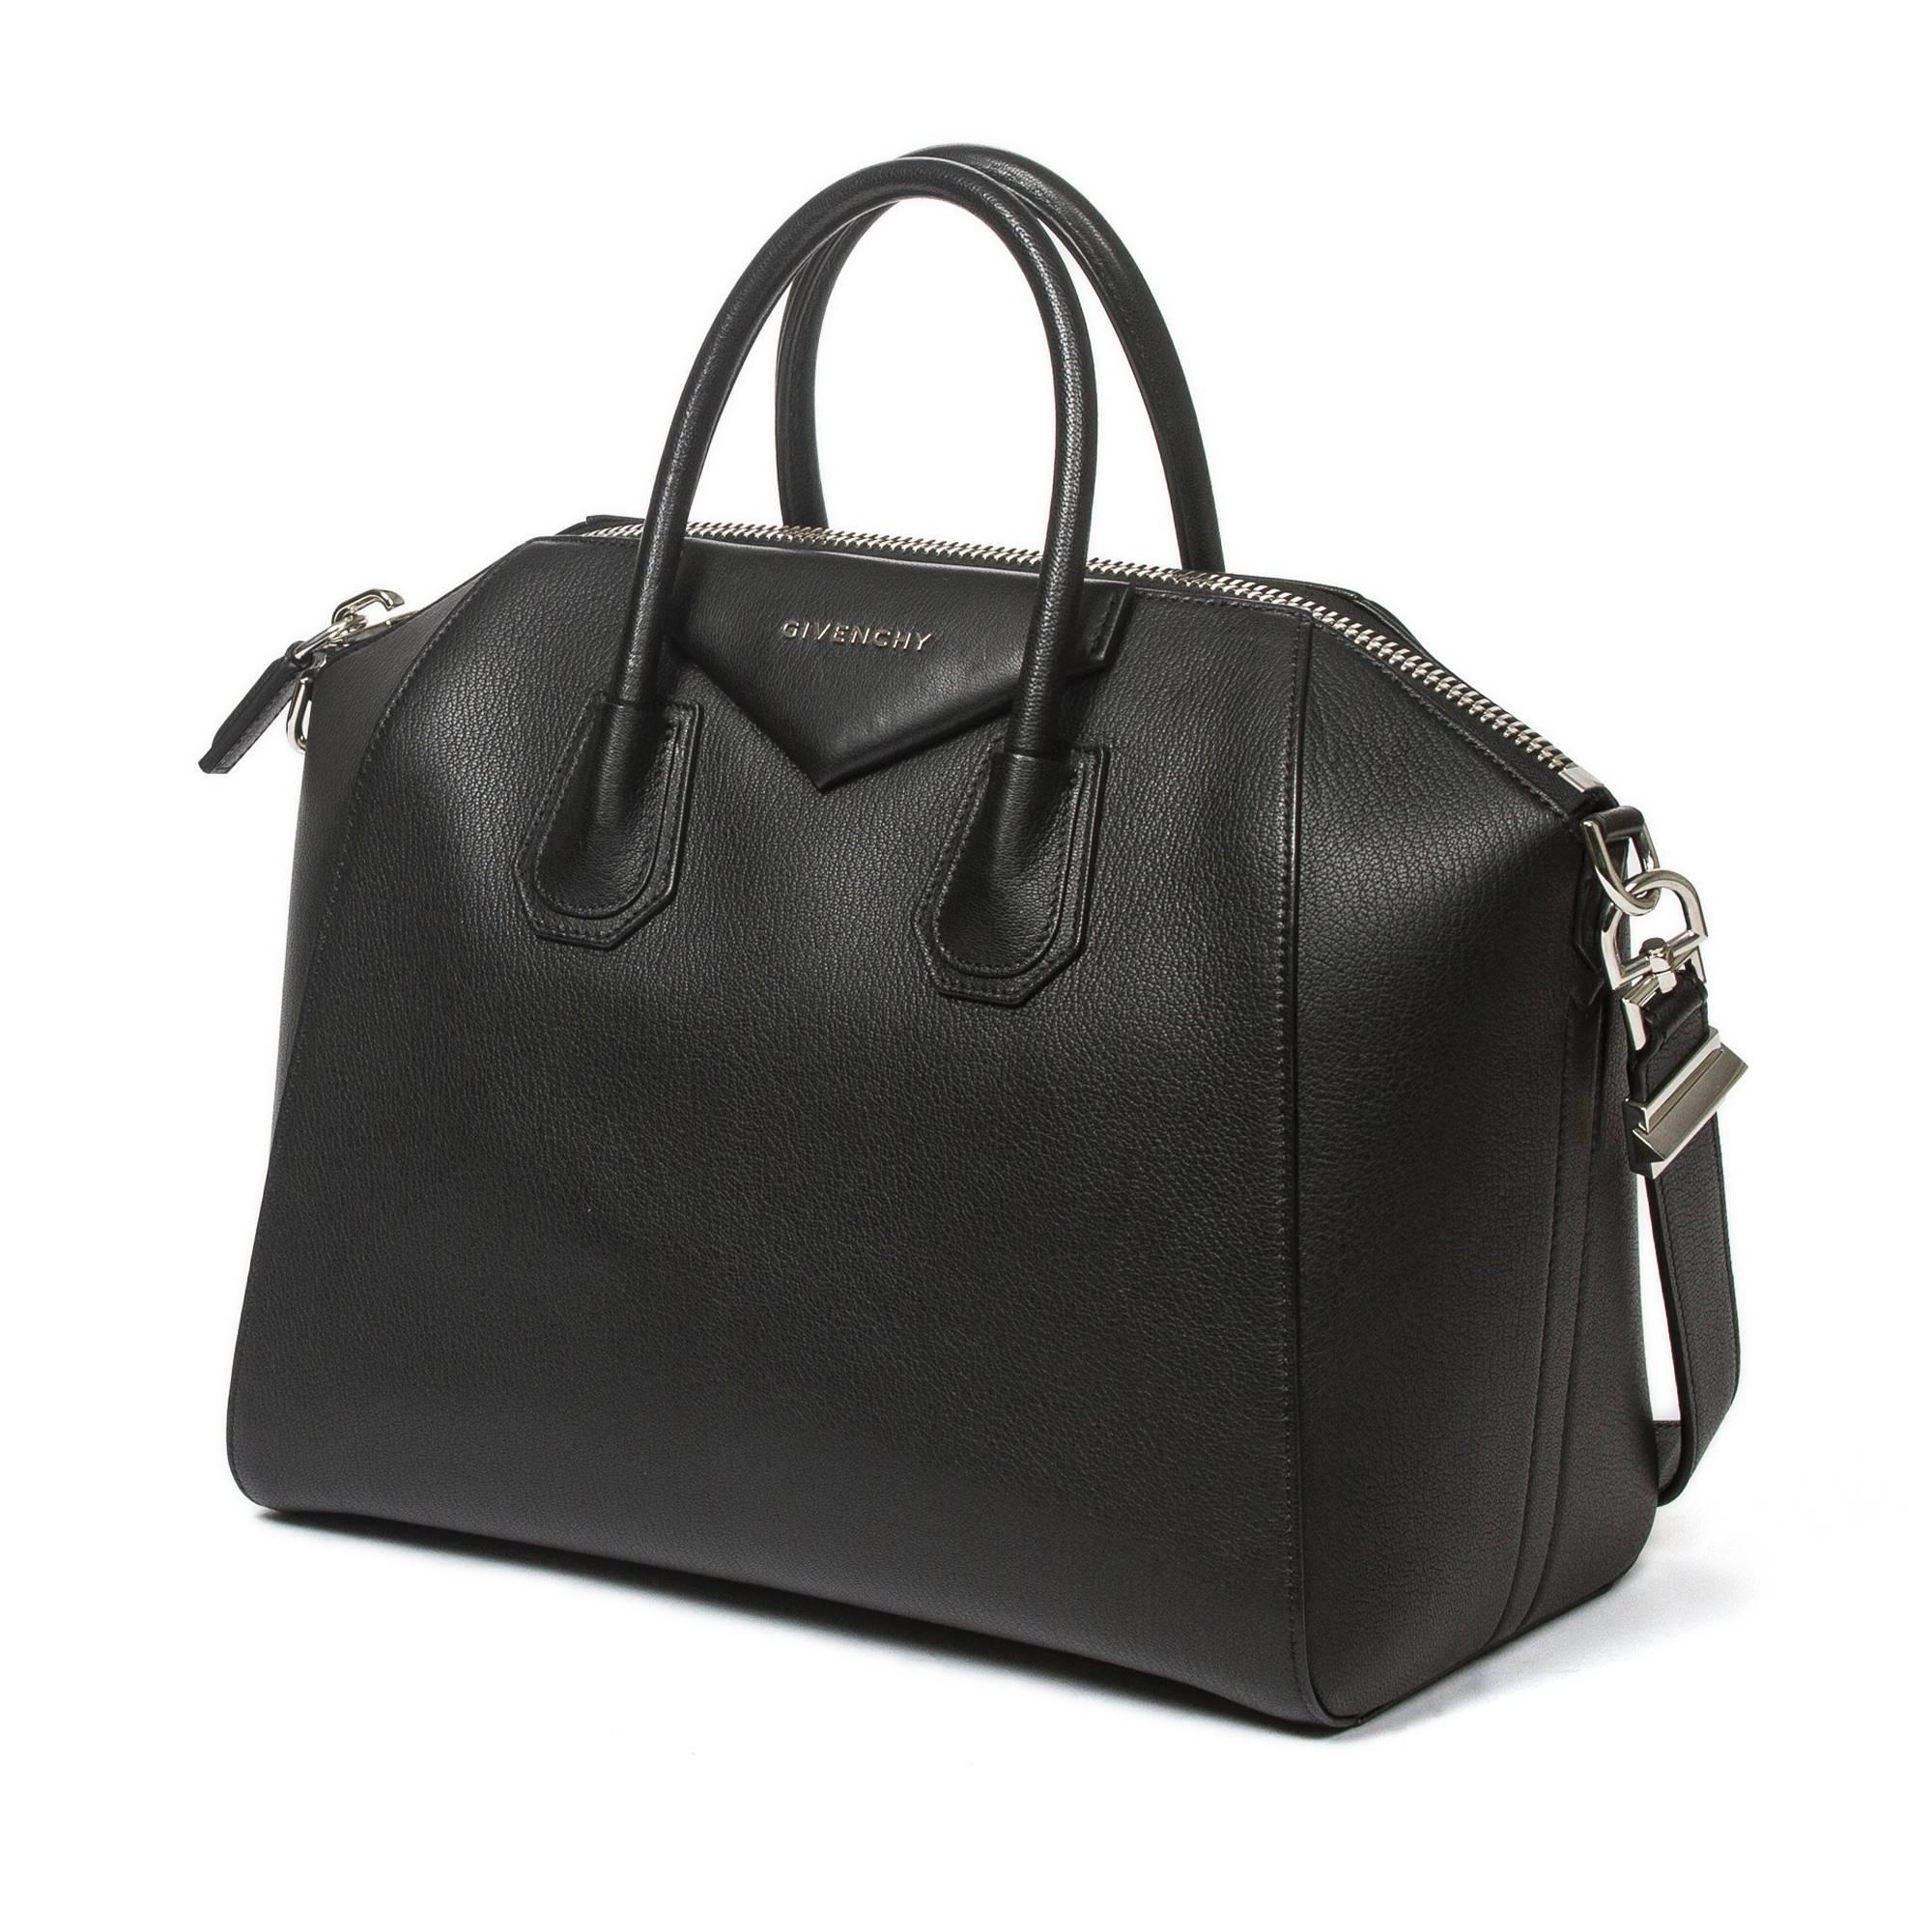 Antigona Medium in black grained leather with shoulder strap and silver tone hardware. Zip closure. Black fabric lined interior with 2 slip pockets and one zip pocket. Production number 3C0163. Dustbag included. This item has been used just a couple